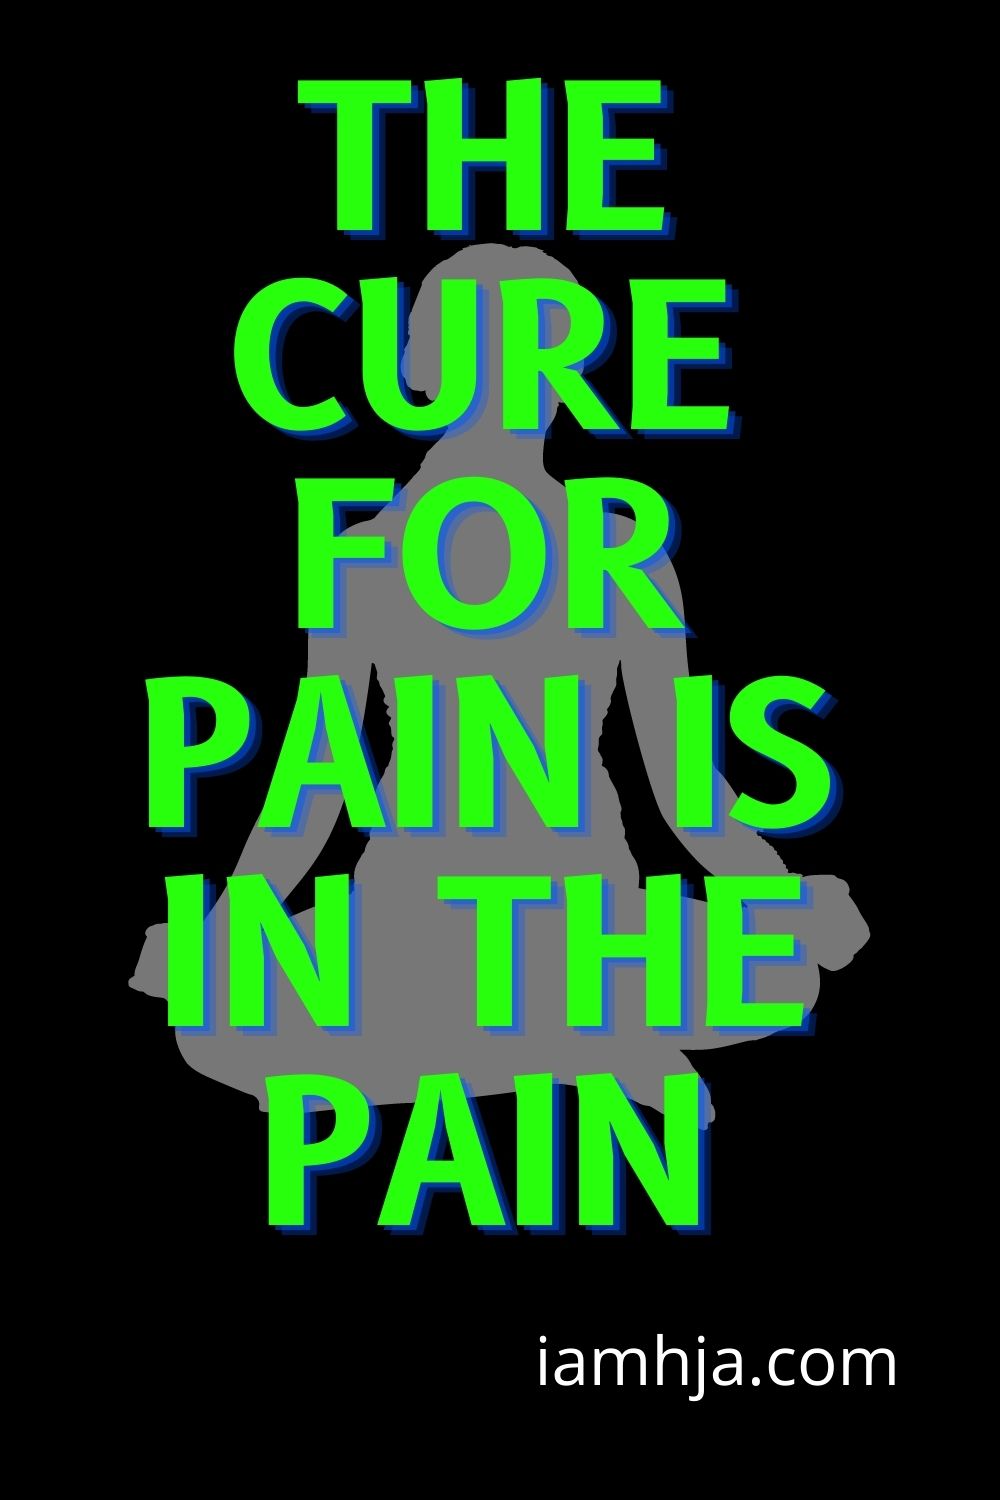 Spiritual Quotes: The cure for pain is in the pain